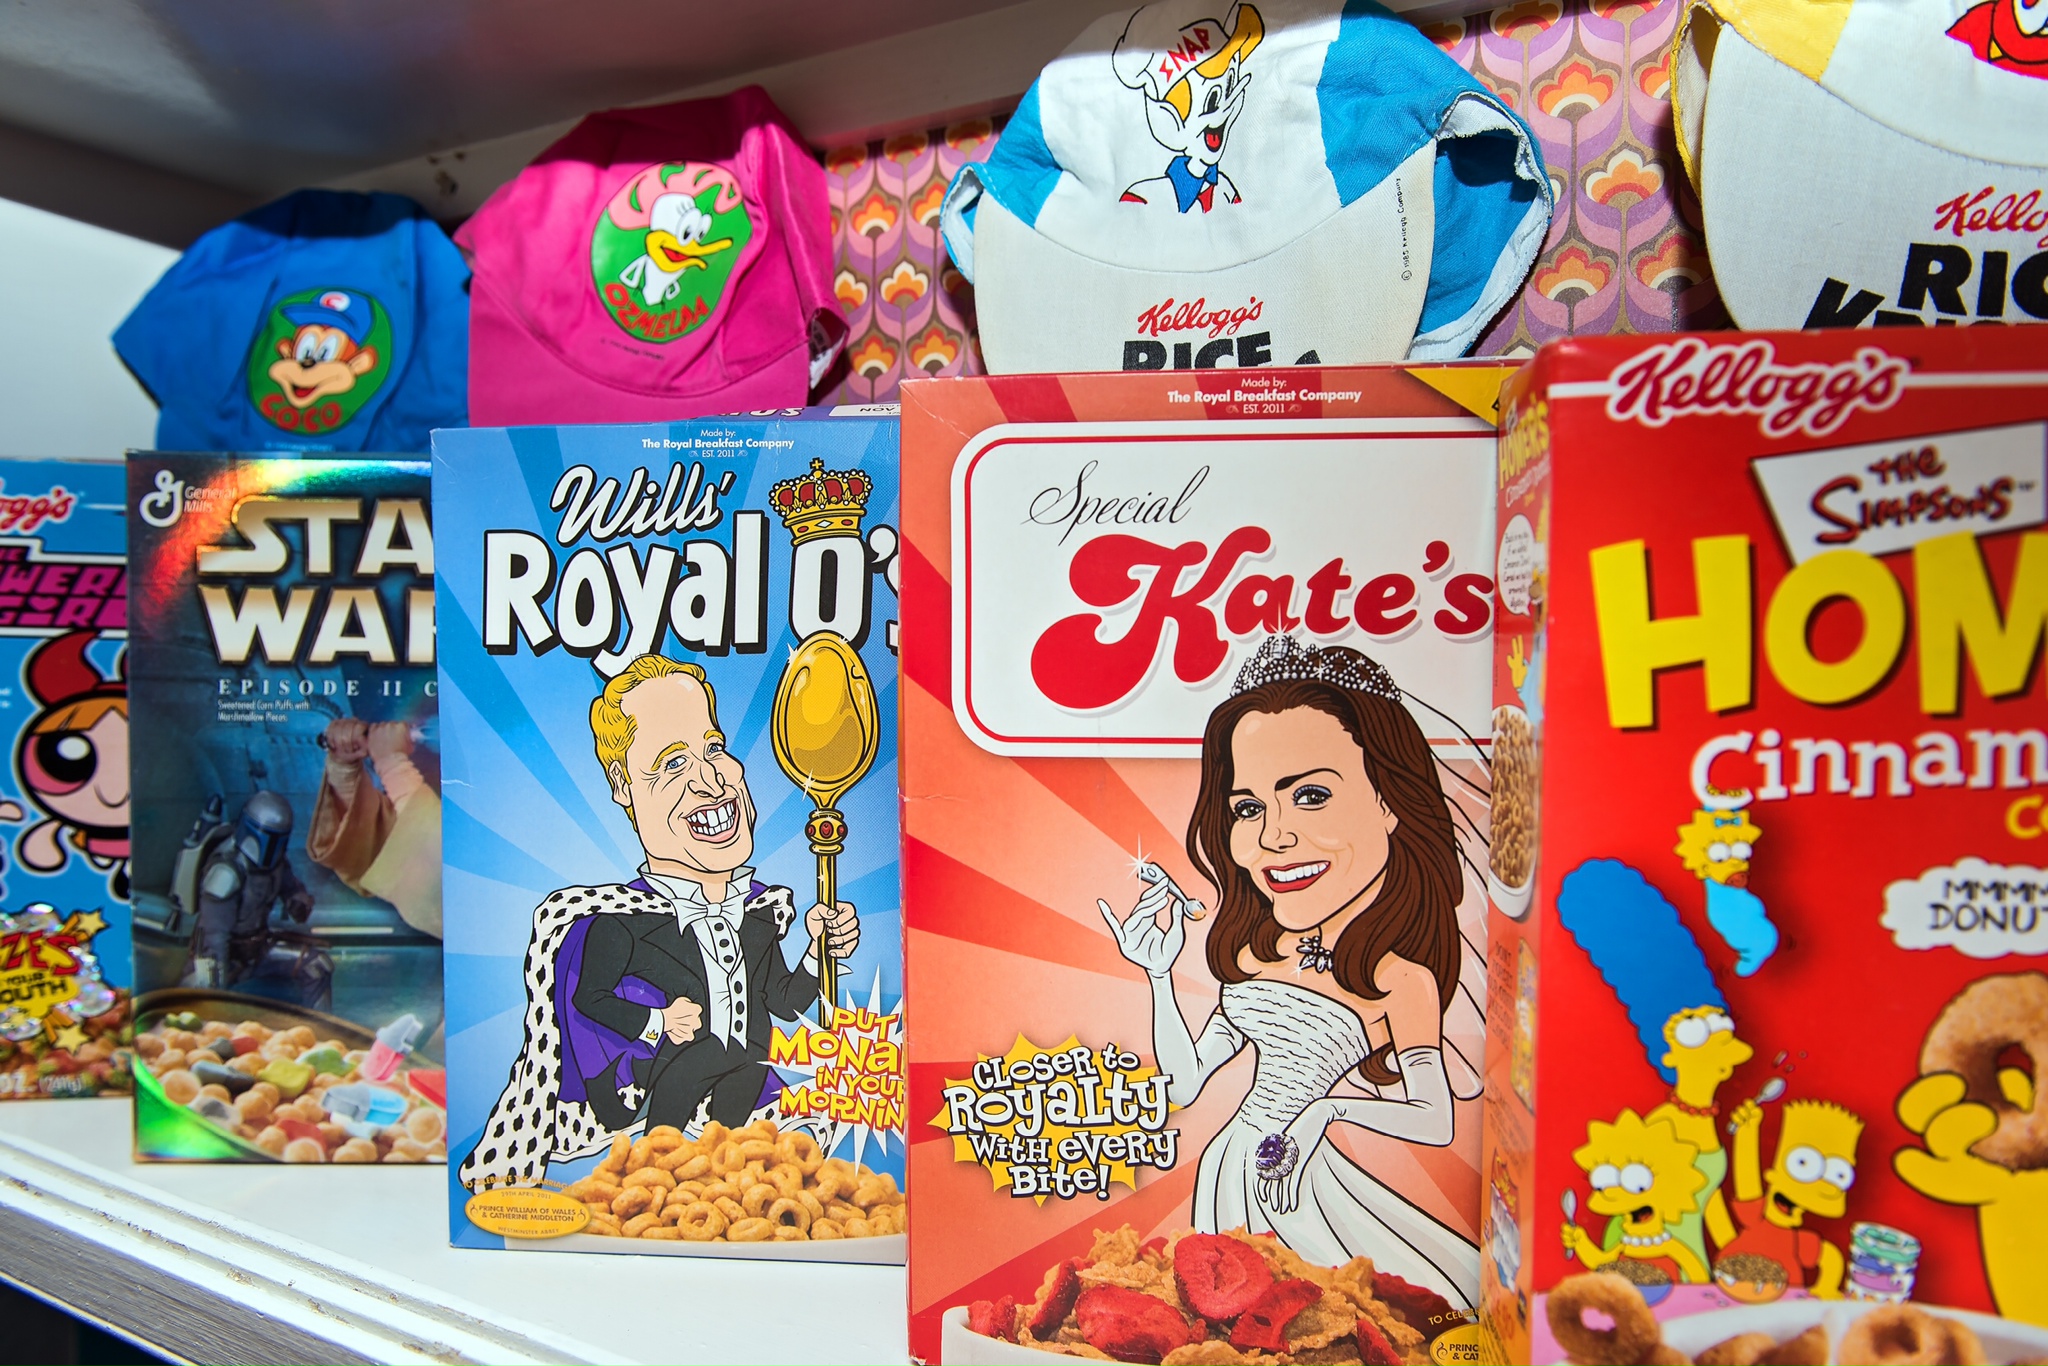 PHOTO: The Cereal Killer Café in London serves 120 different types of cereals from 7:00 a.m. to 8:00 p.m. 